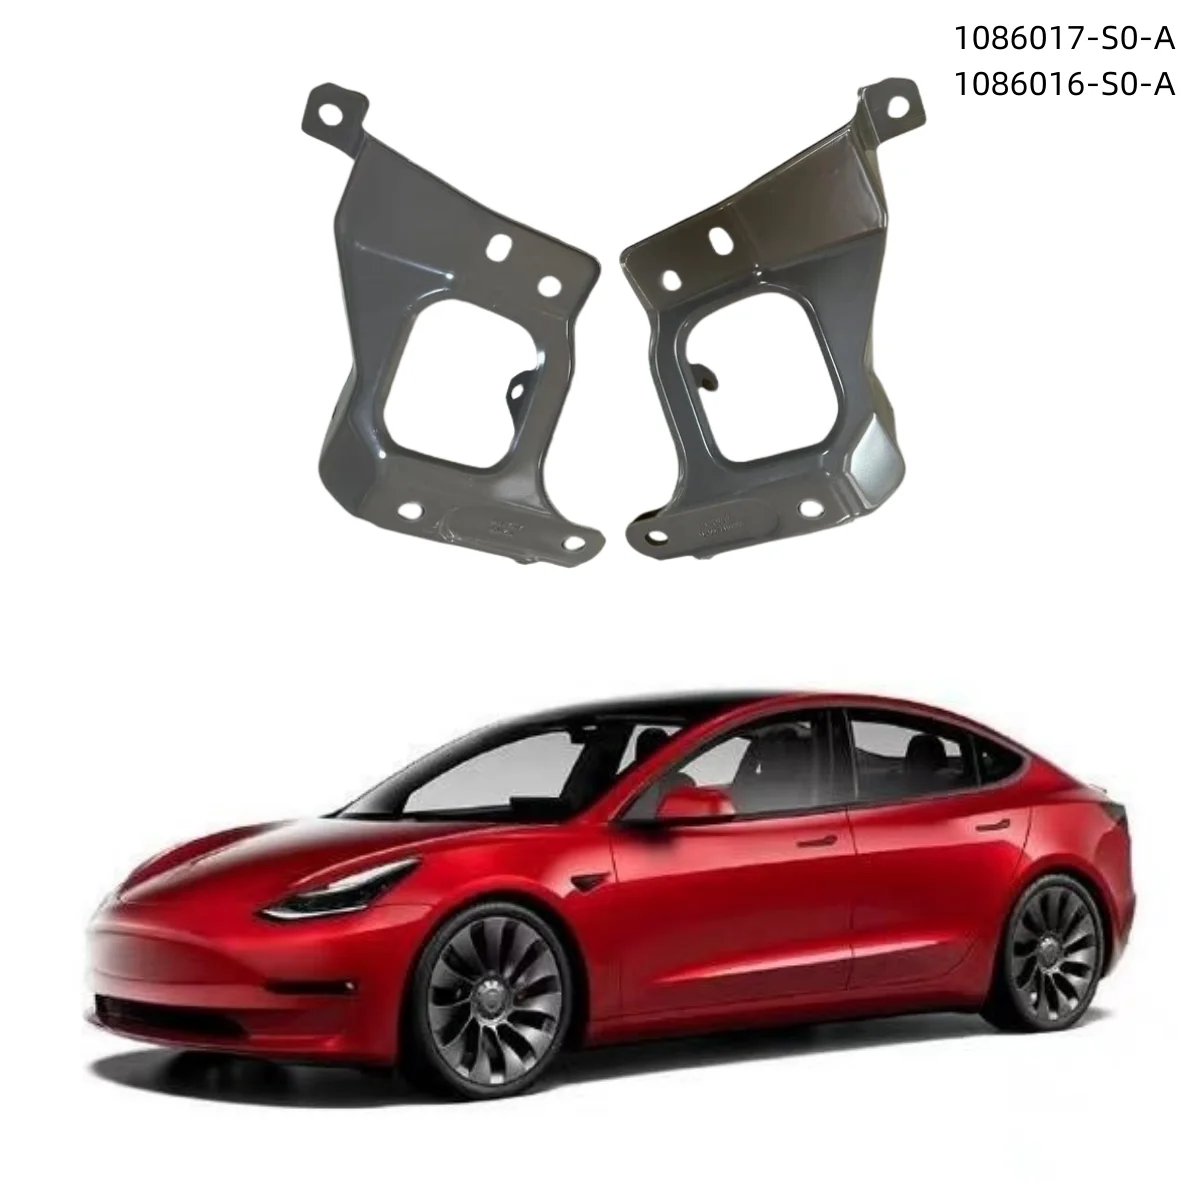 

Tesla Model 3 front fender left and right side fixing brackets 1086017-S0-A 1086016-S0-A